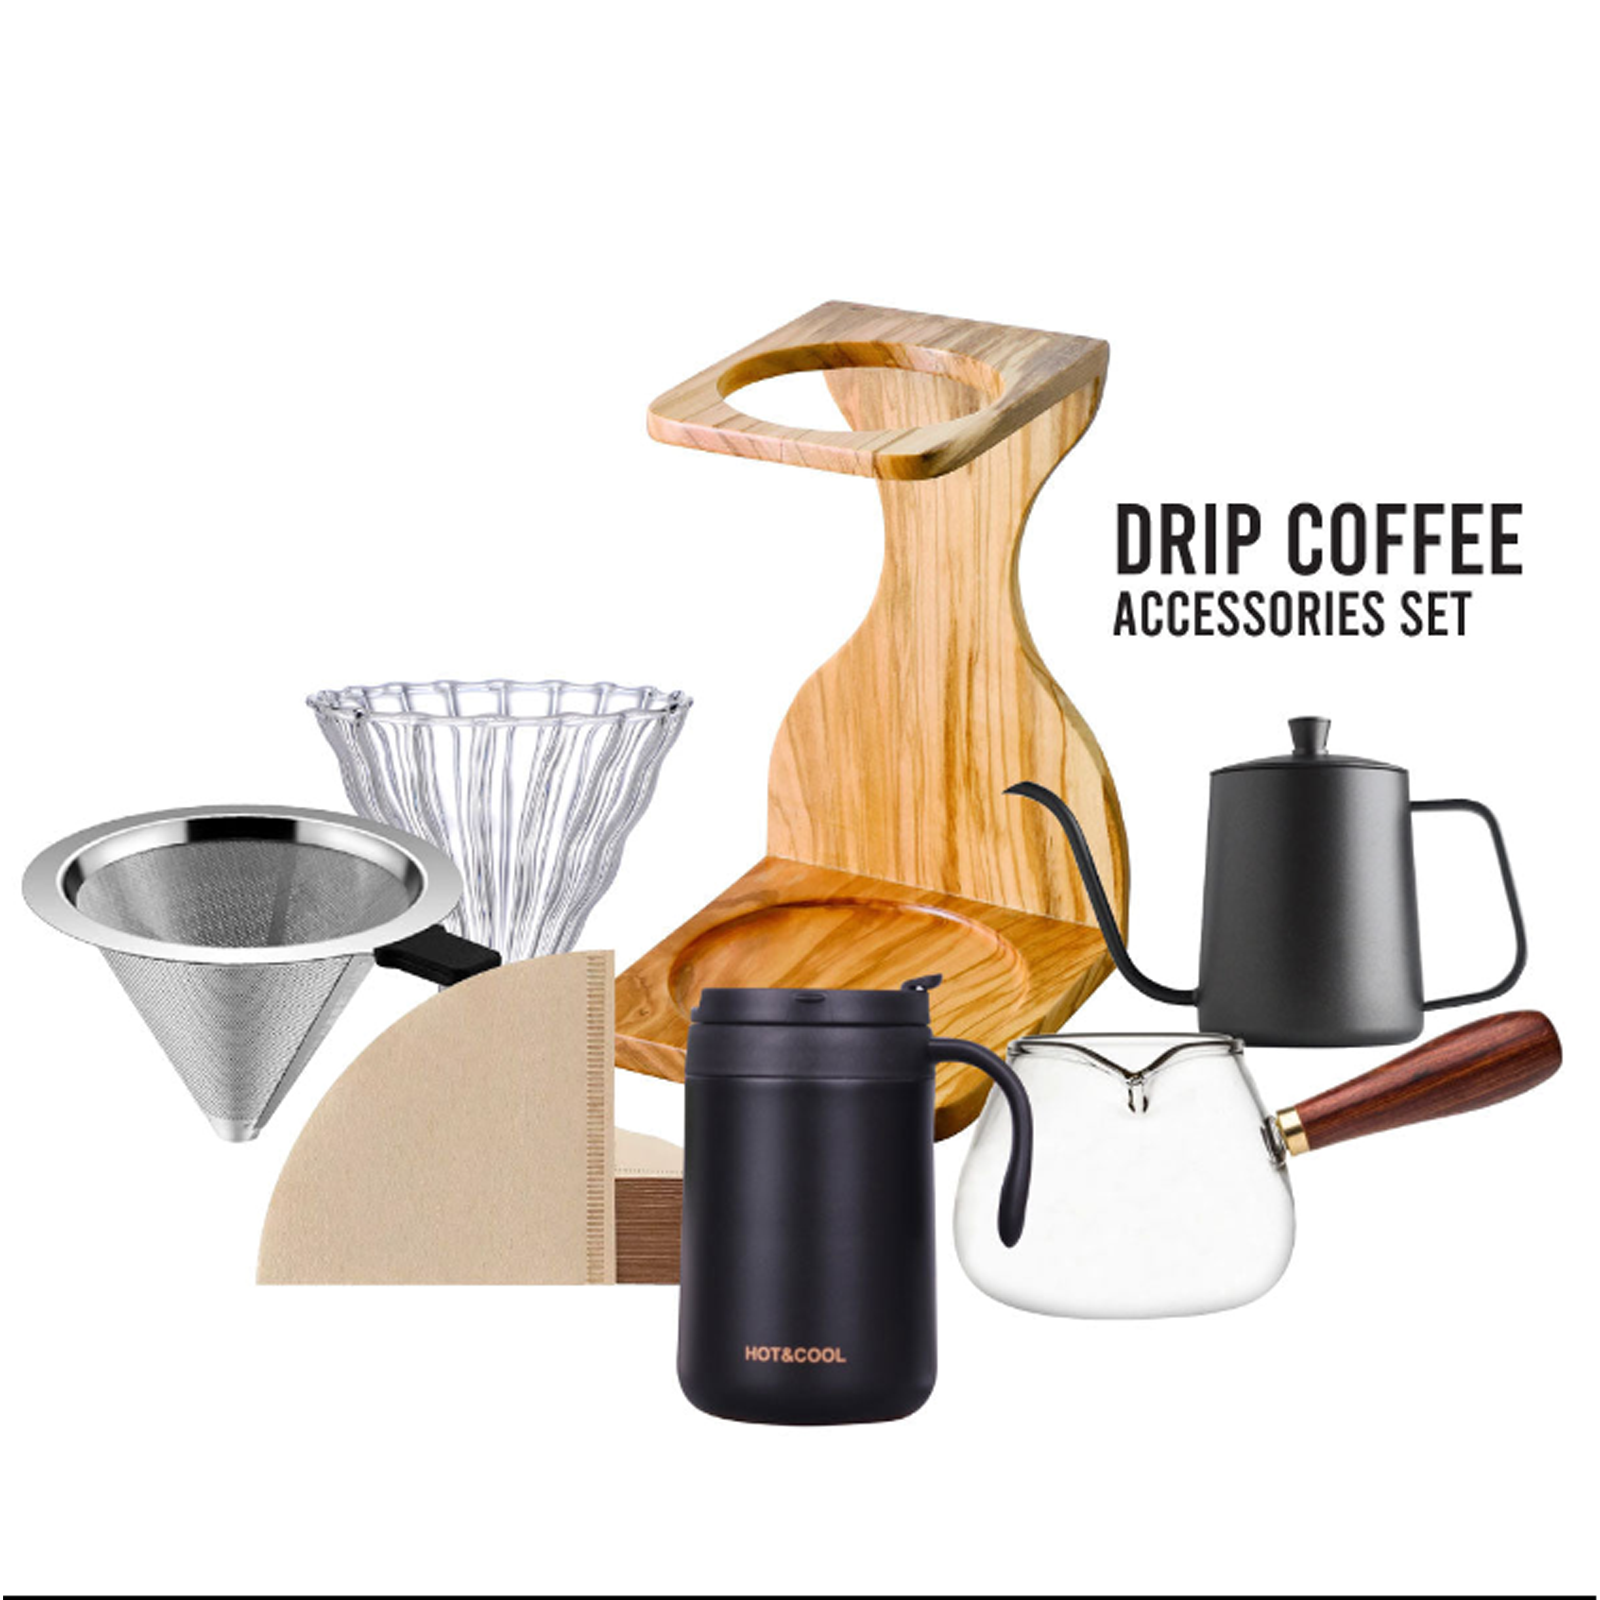 Brewing Coffee In Hand Drip Coffee Maker Woman Hand Pour Coffee